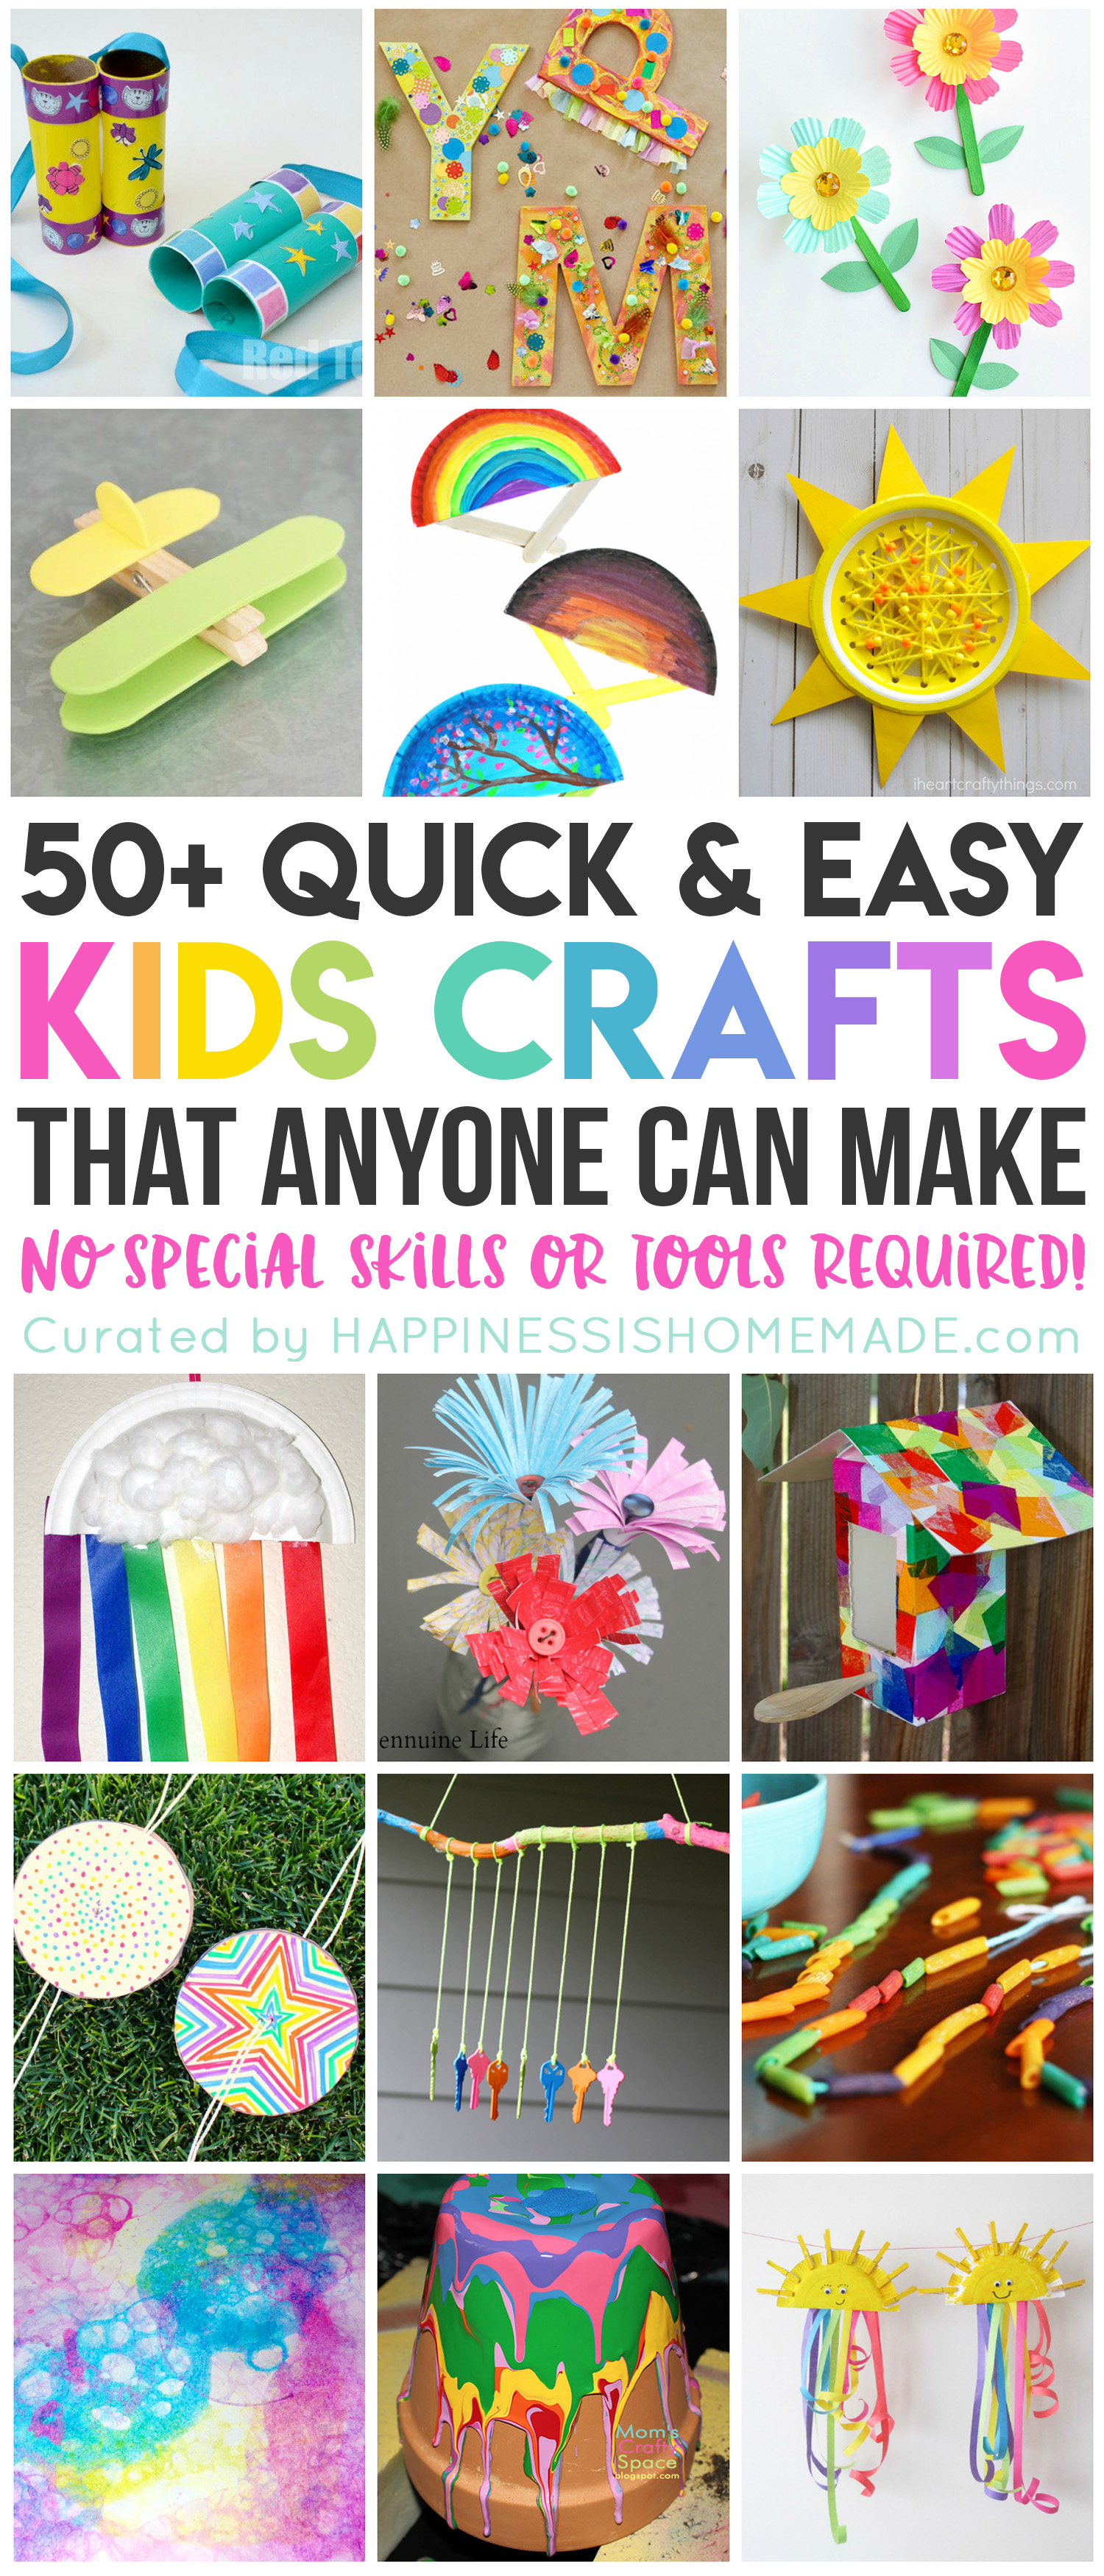 50-quick-easy-kids-crafts-that-anyone-can-make-happiness-is-homemade